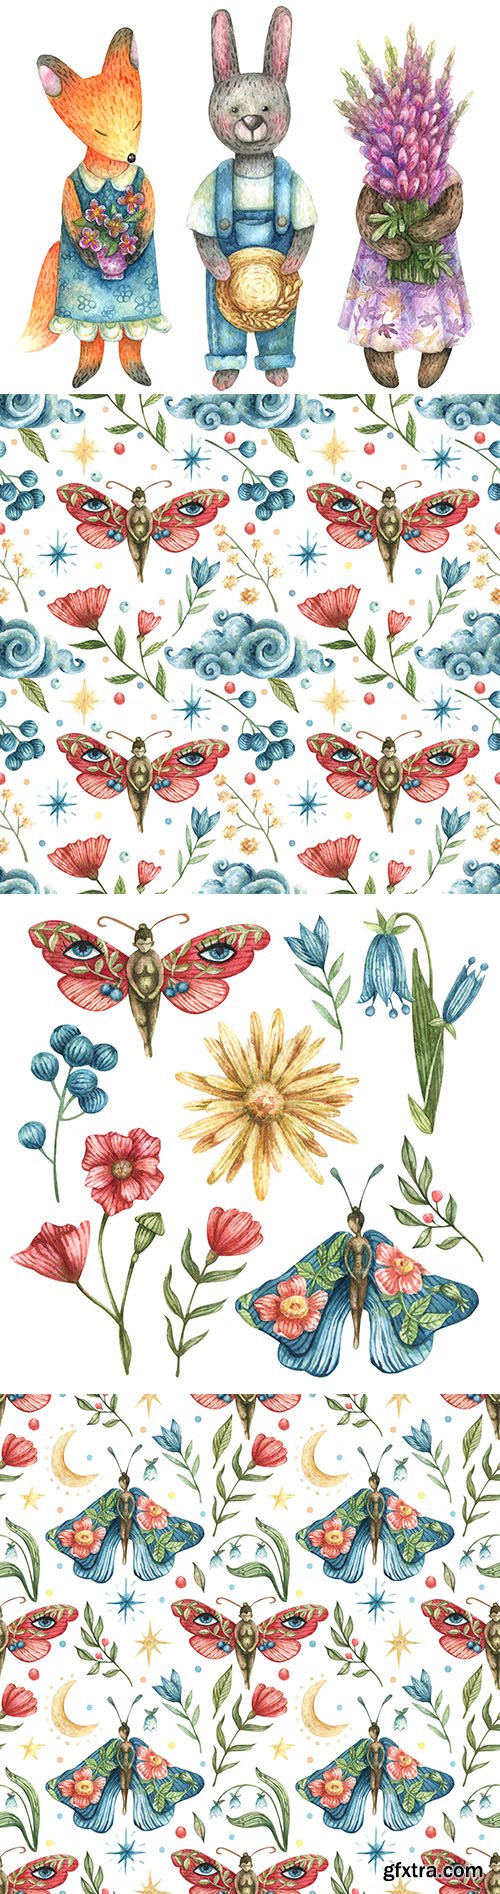 Cute animals, flowers and watercolor seamless pattern